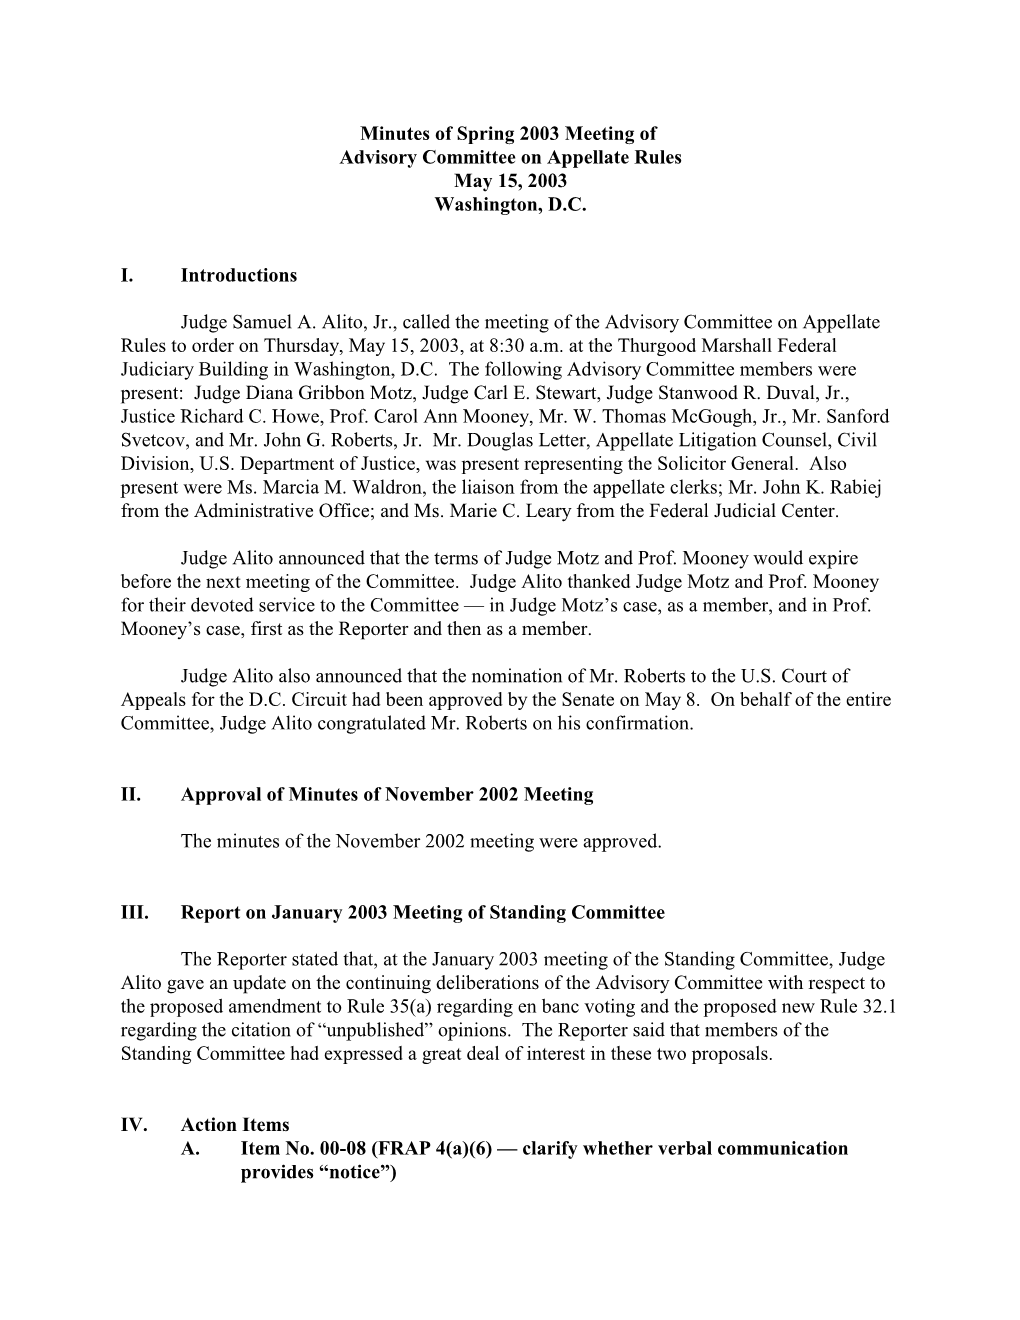 Minutes of Spring 2003 Meeting of Advisory Committee on Appellate Rules May 15, 2003 Washington, D.C